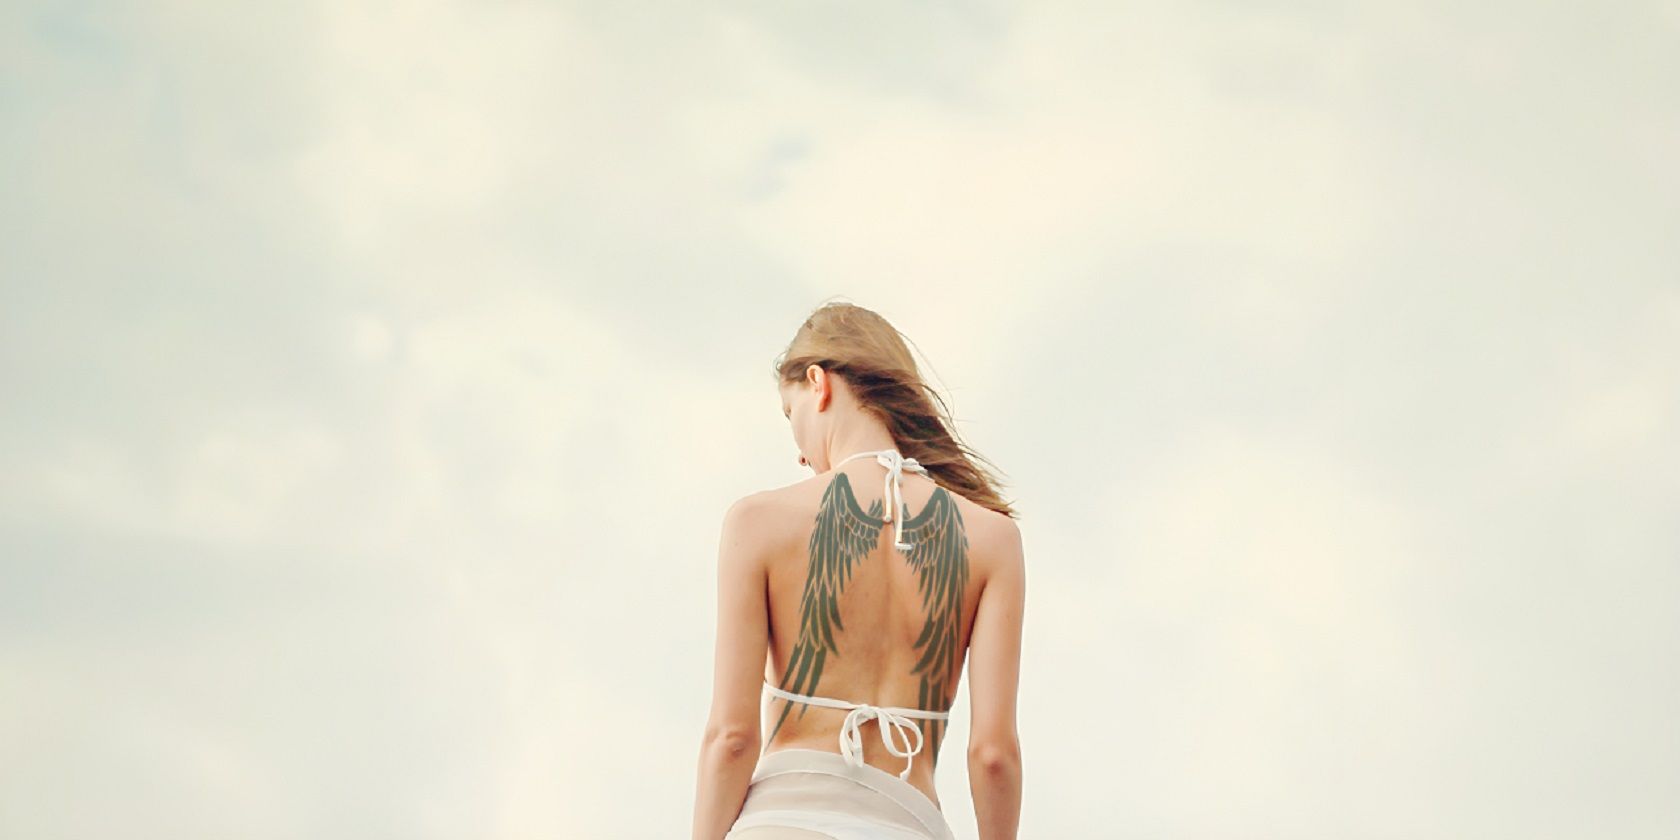 Woman in Swimsuit With Tattoo on Back